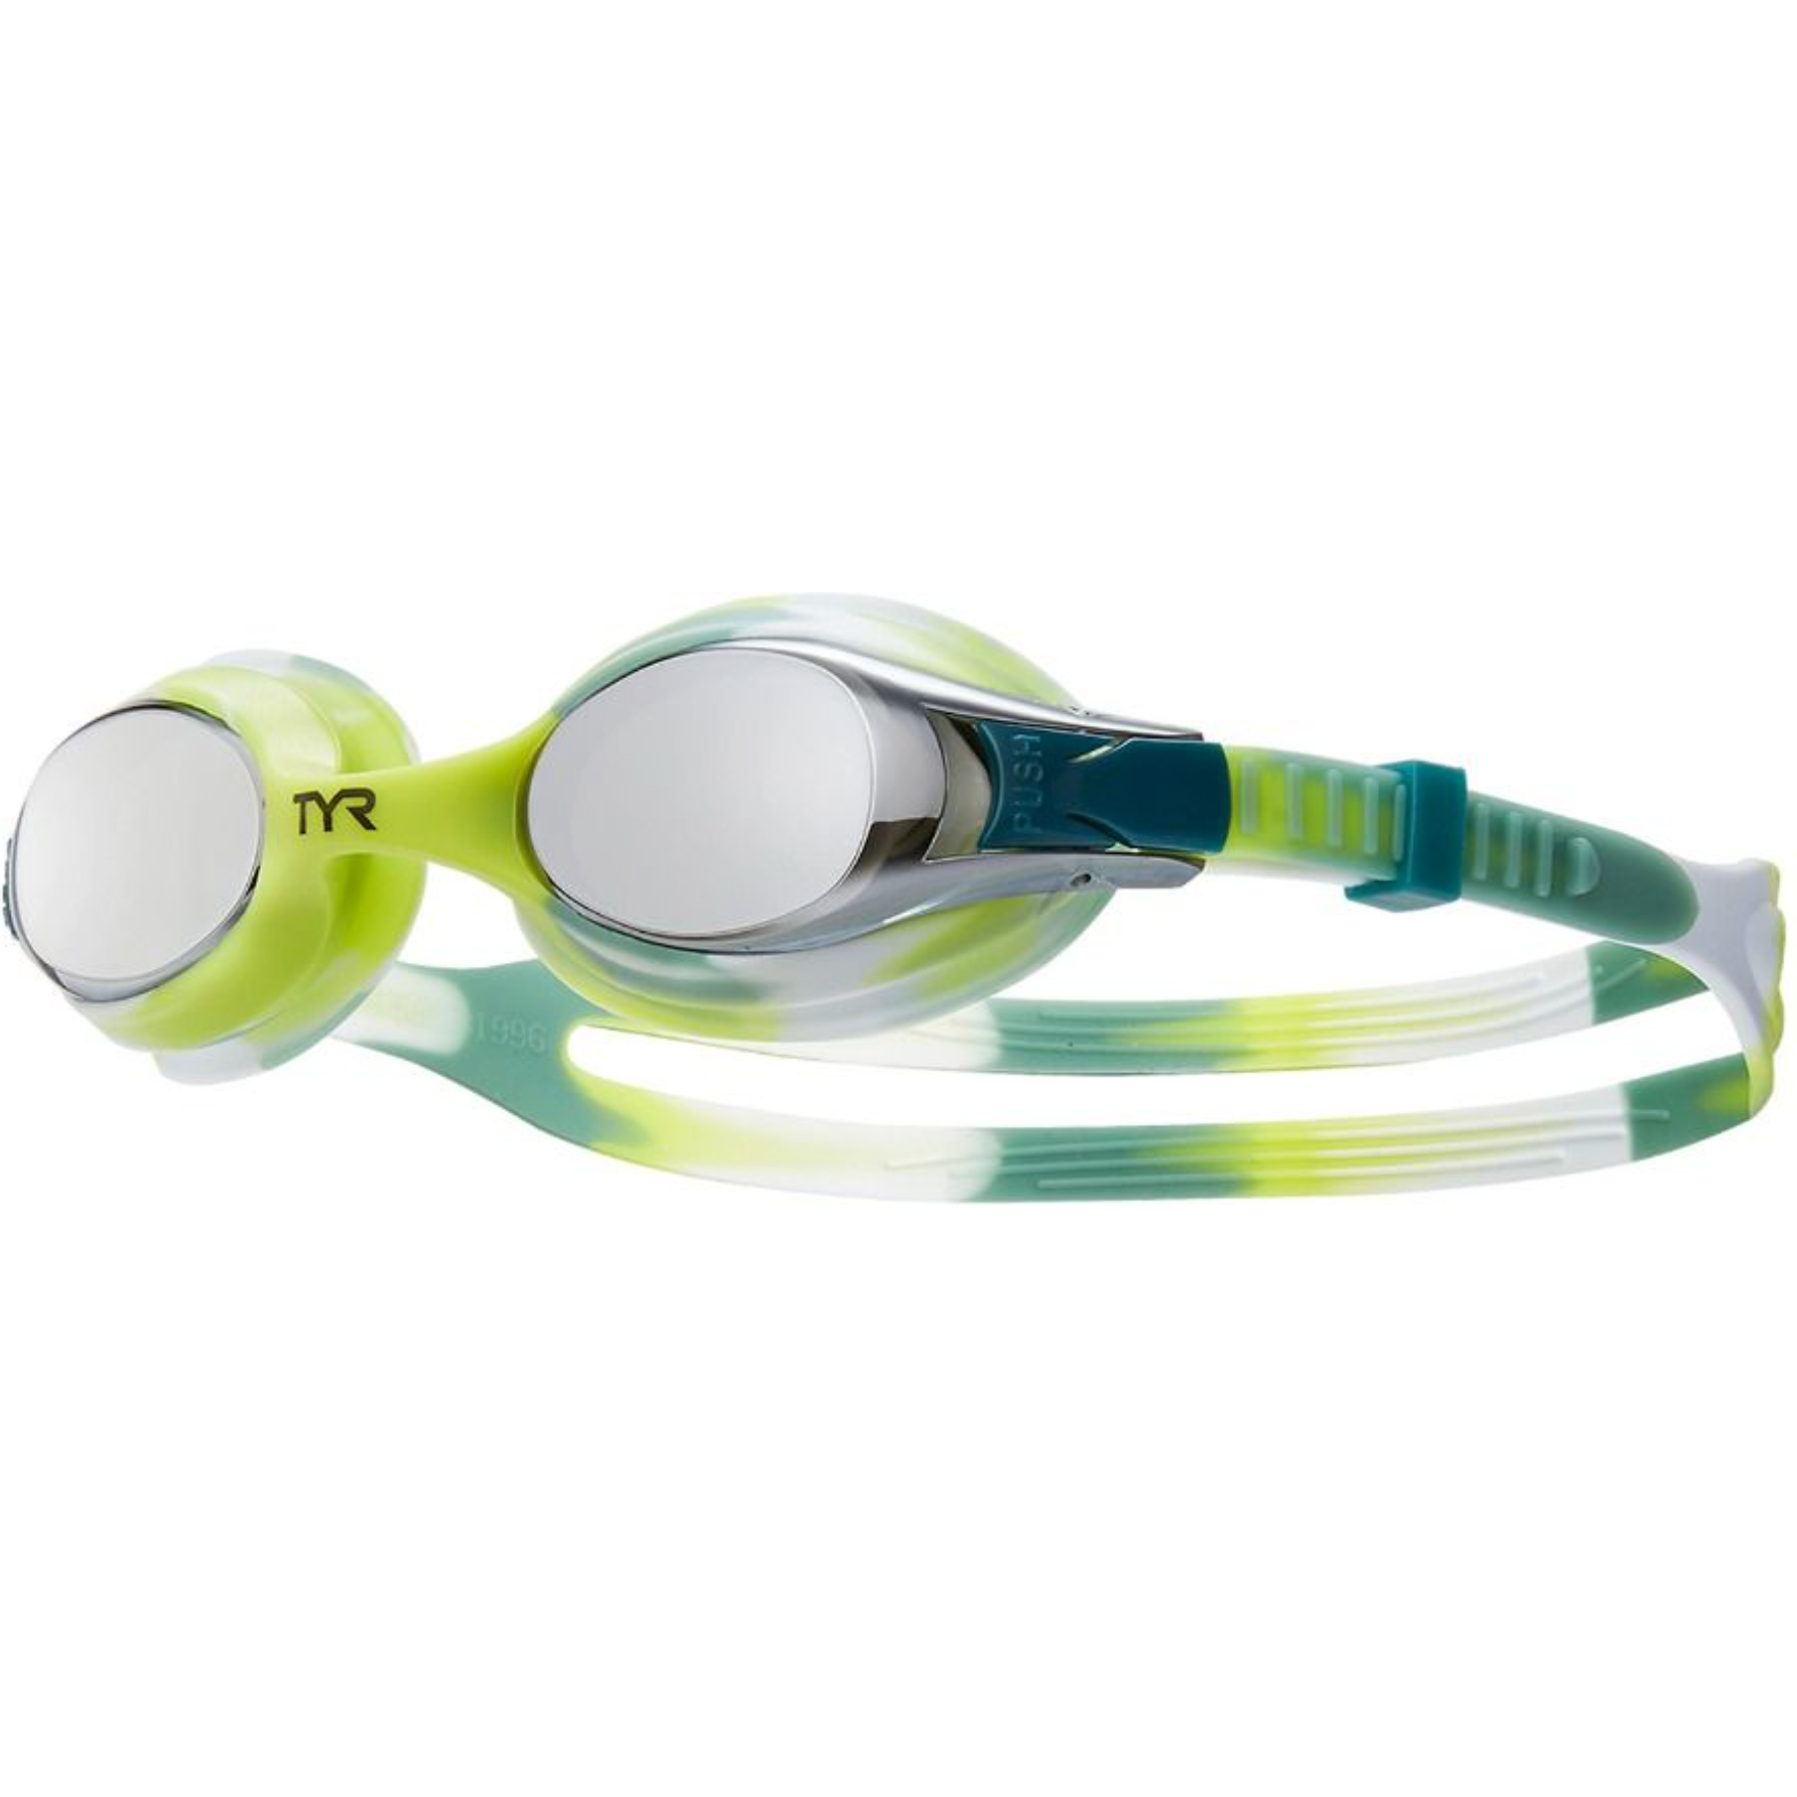 TYR Swimple Tie Dye Mirrored Goggle